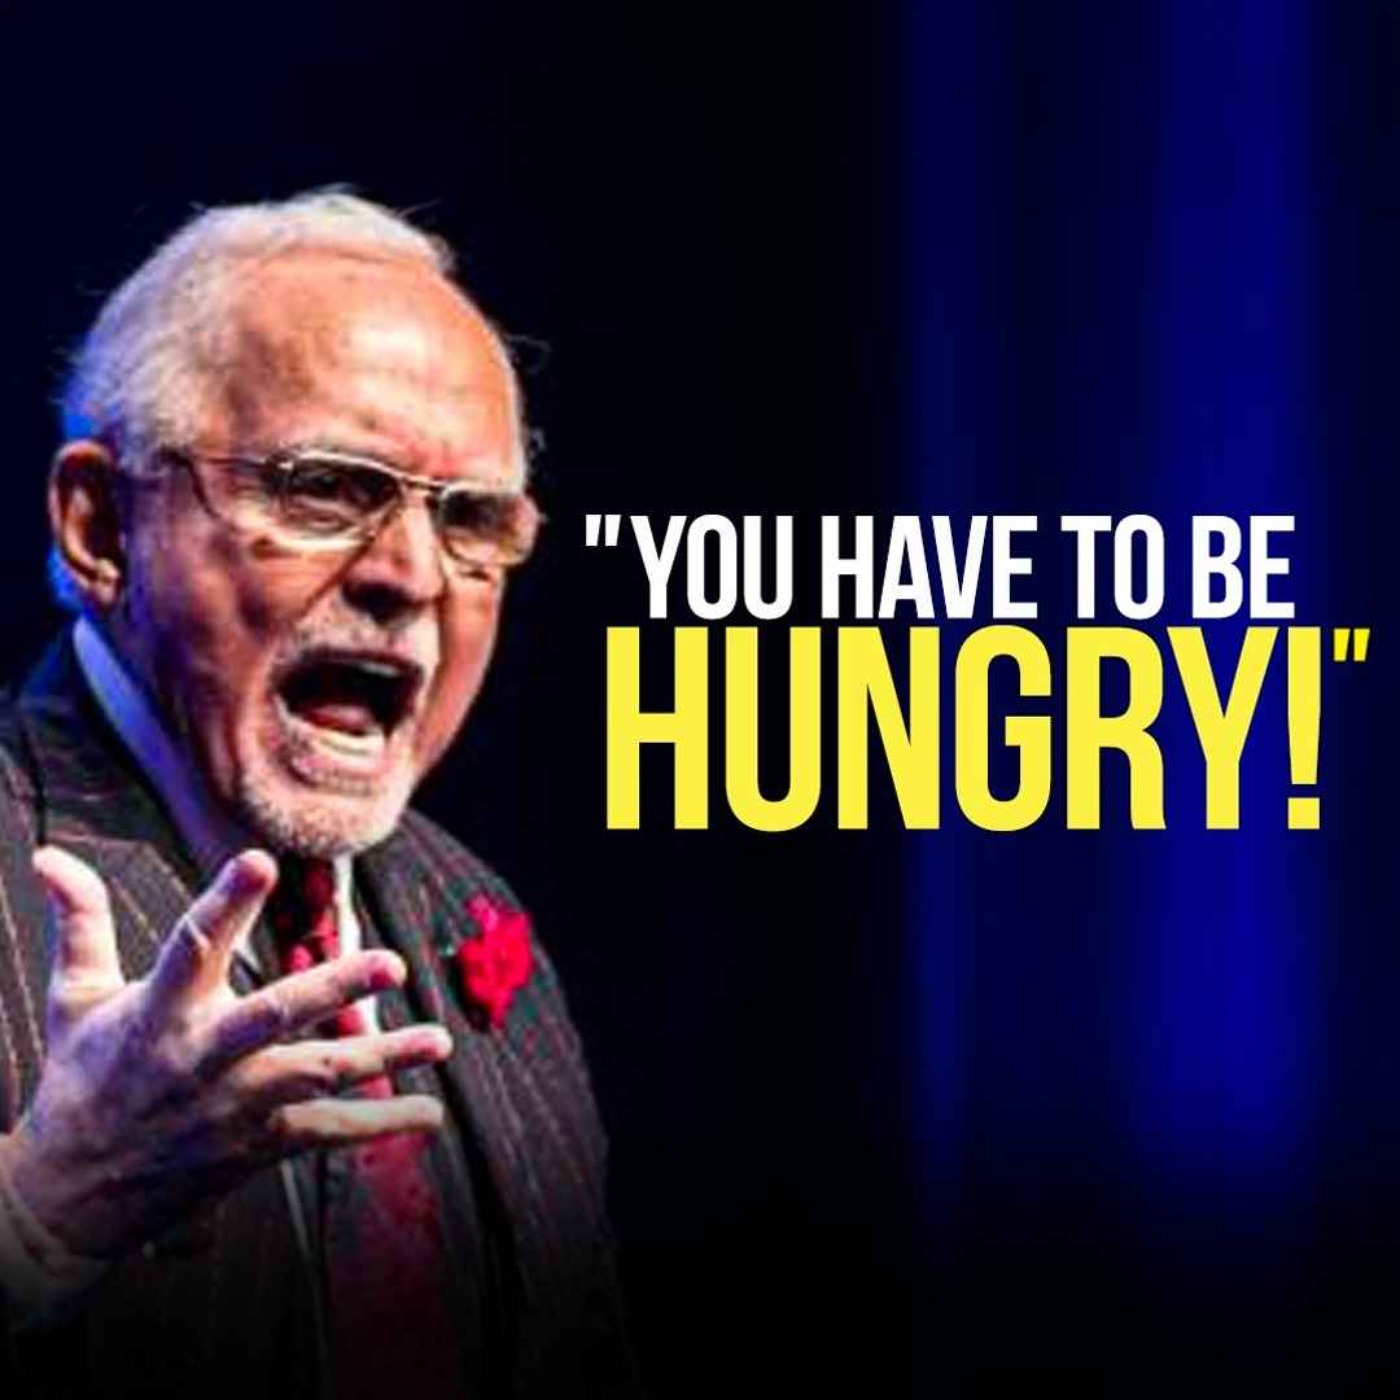 YOU AREN'T HUNGRY ENOUGH - Powerful Motivational Speech for Success featuring Dan Pena